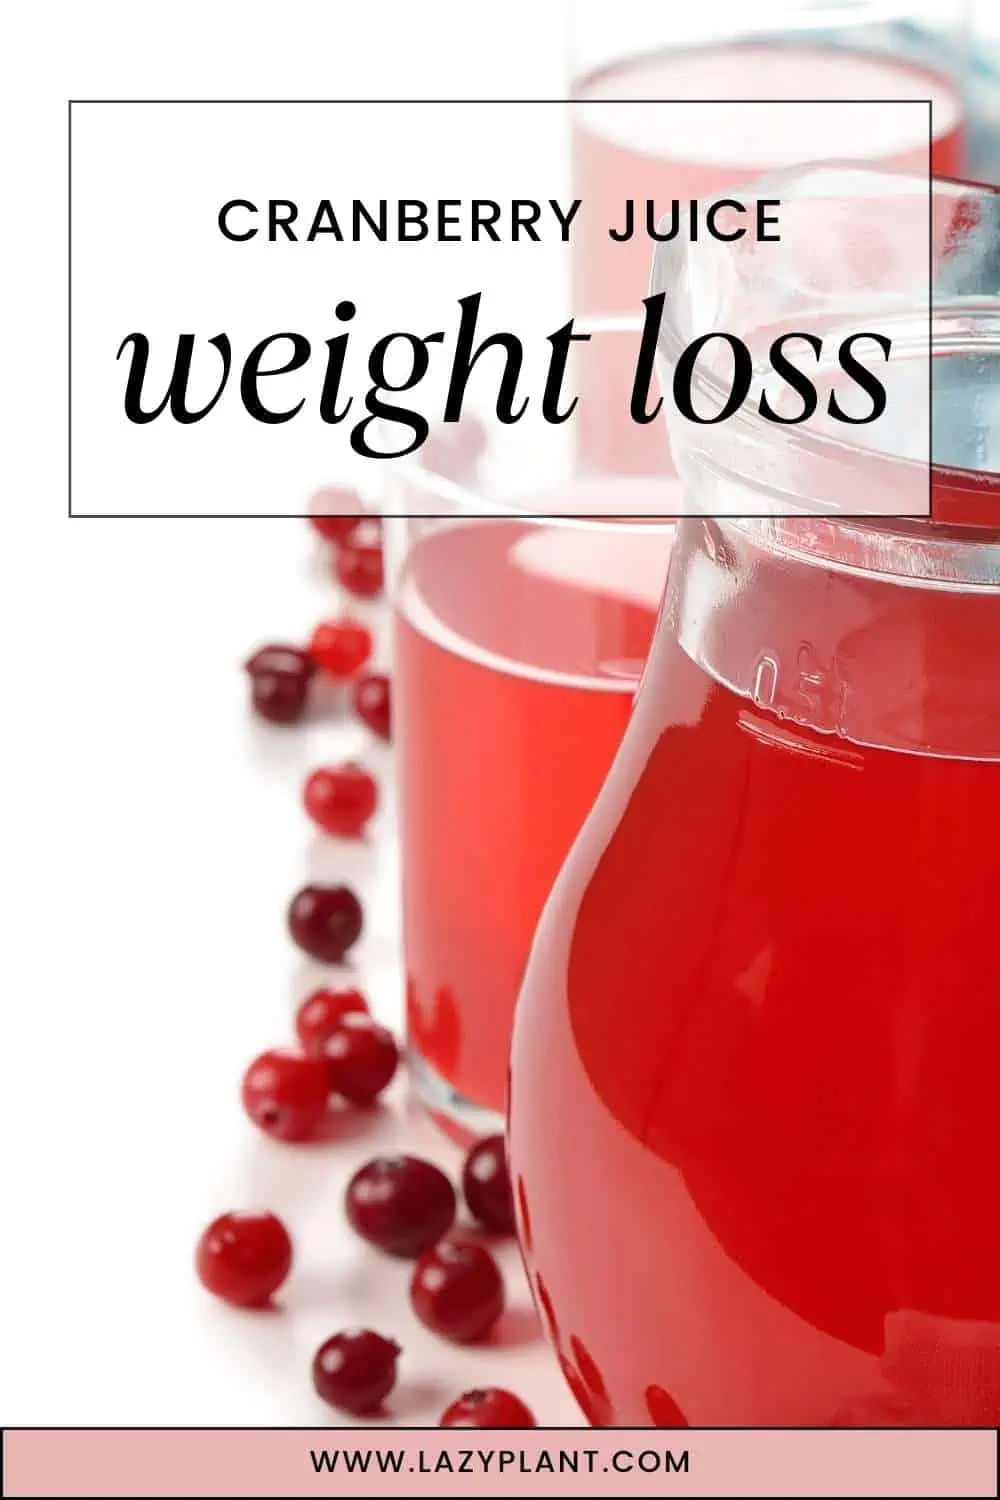 Cranberry juice for weight loss: Low in calories. High in polyphenols.